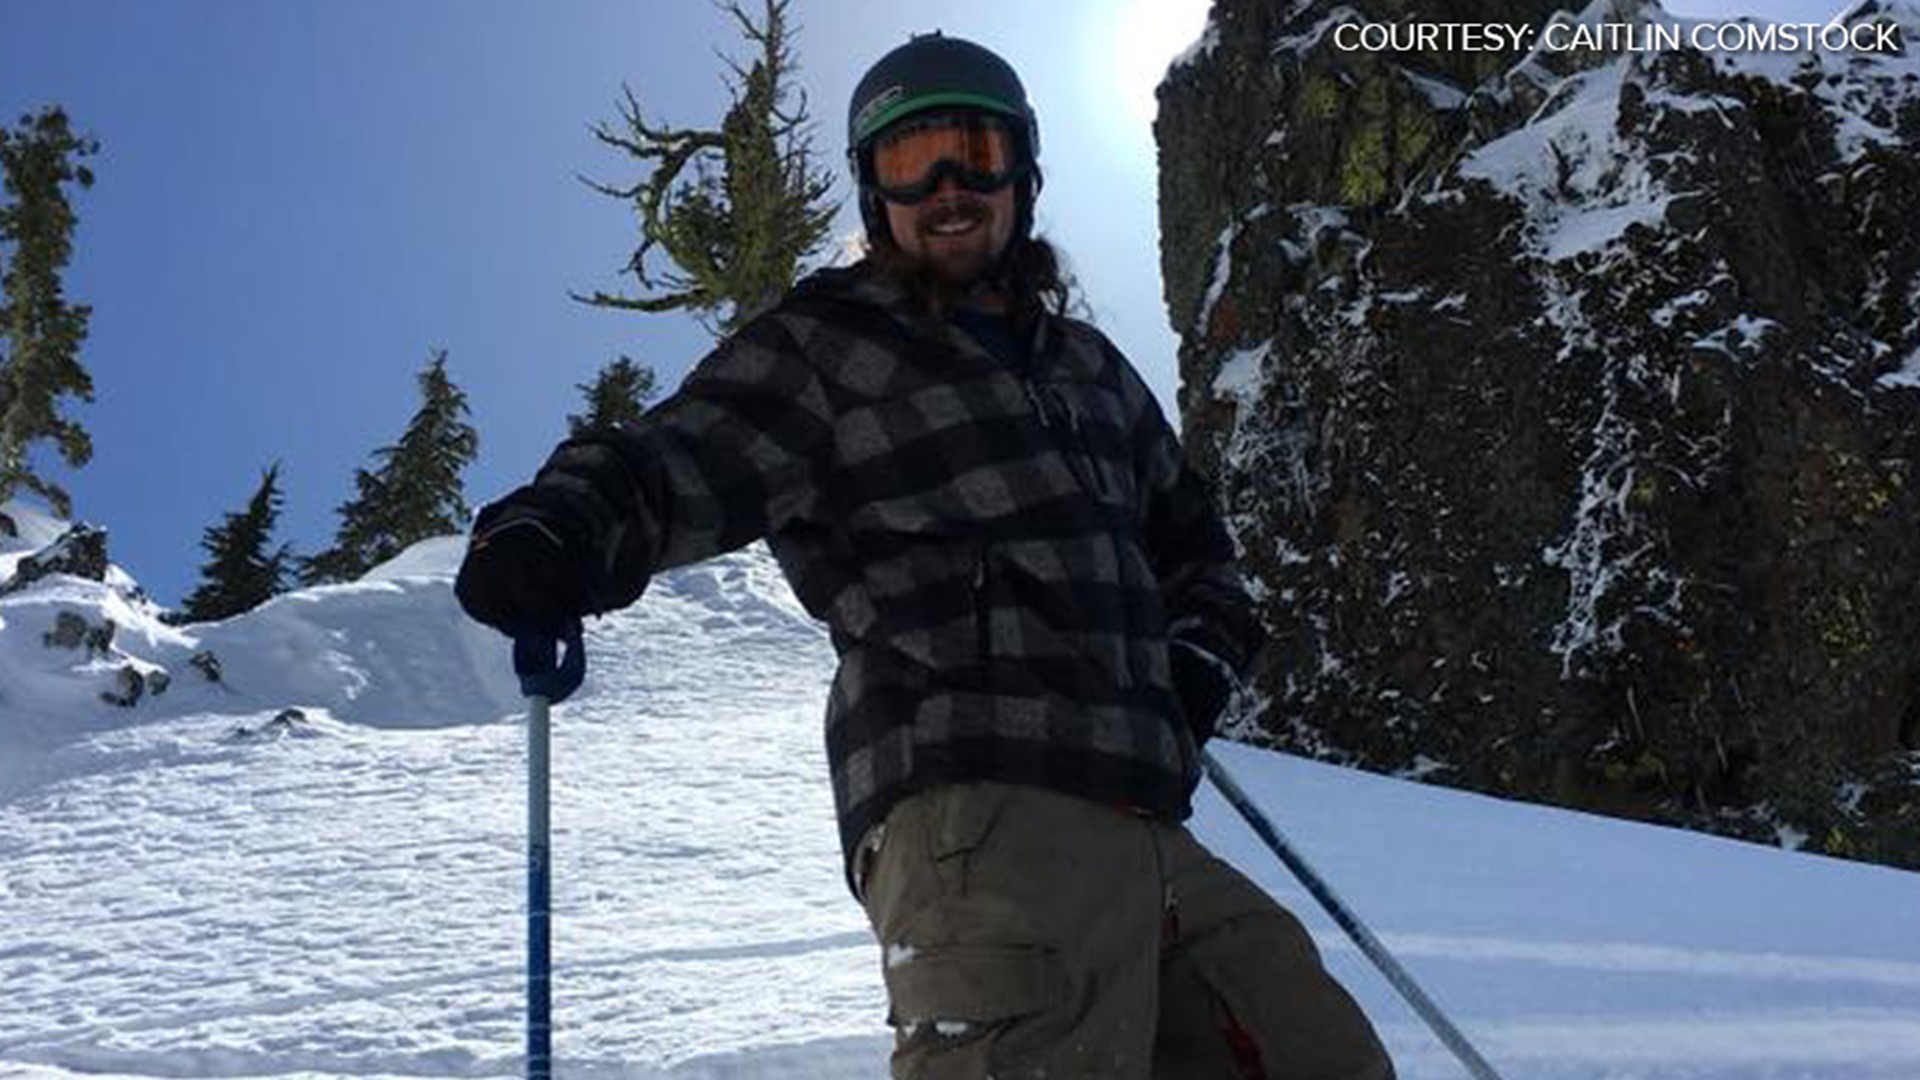 Friends of Cole Comstock, who was killed in an avalanche at Alpine Meadows on Friday, said Comstock was more than just a friend; he was like family.